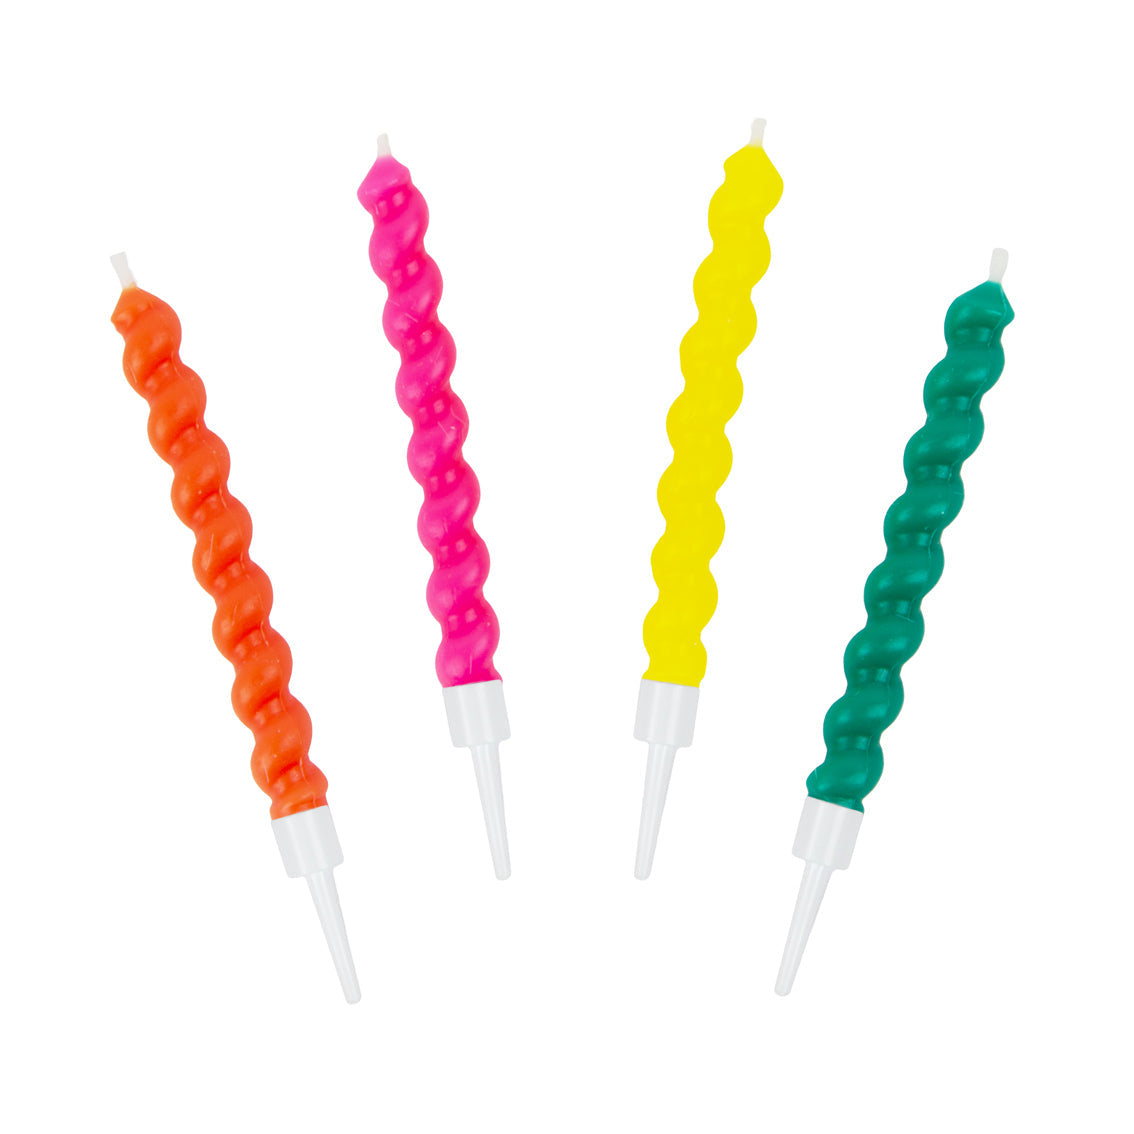 Bright Twirl Birthday Candles 8 Pk from penny black